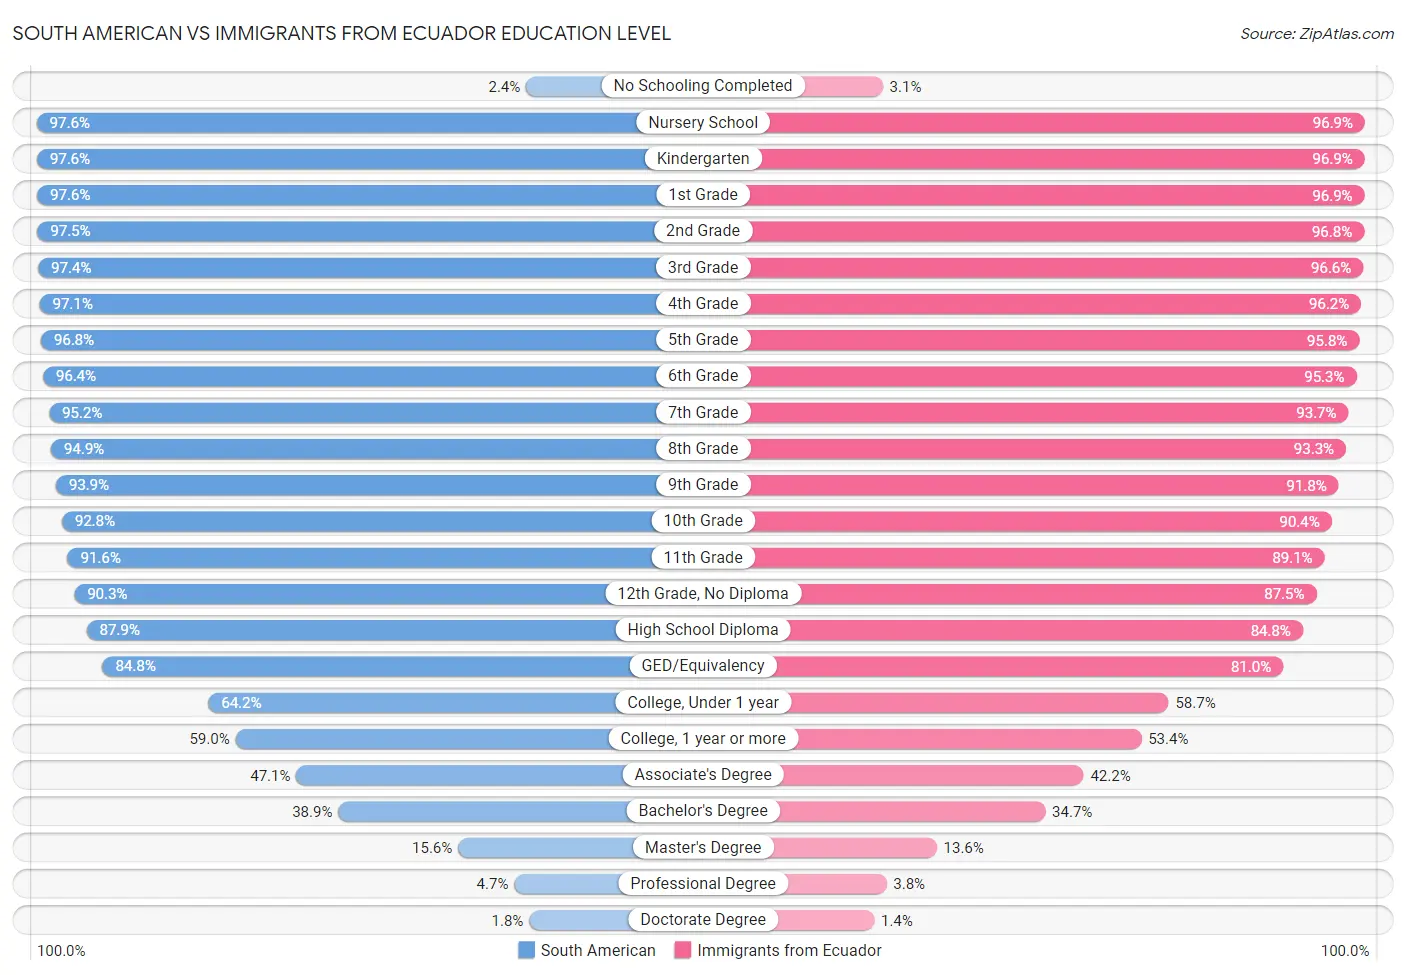 South American vs Immigrants from Ecuador Education Level